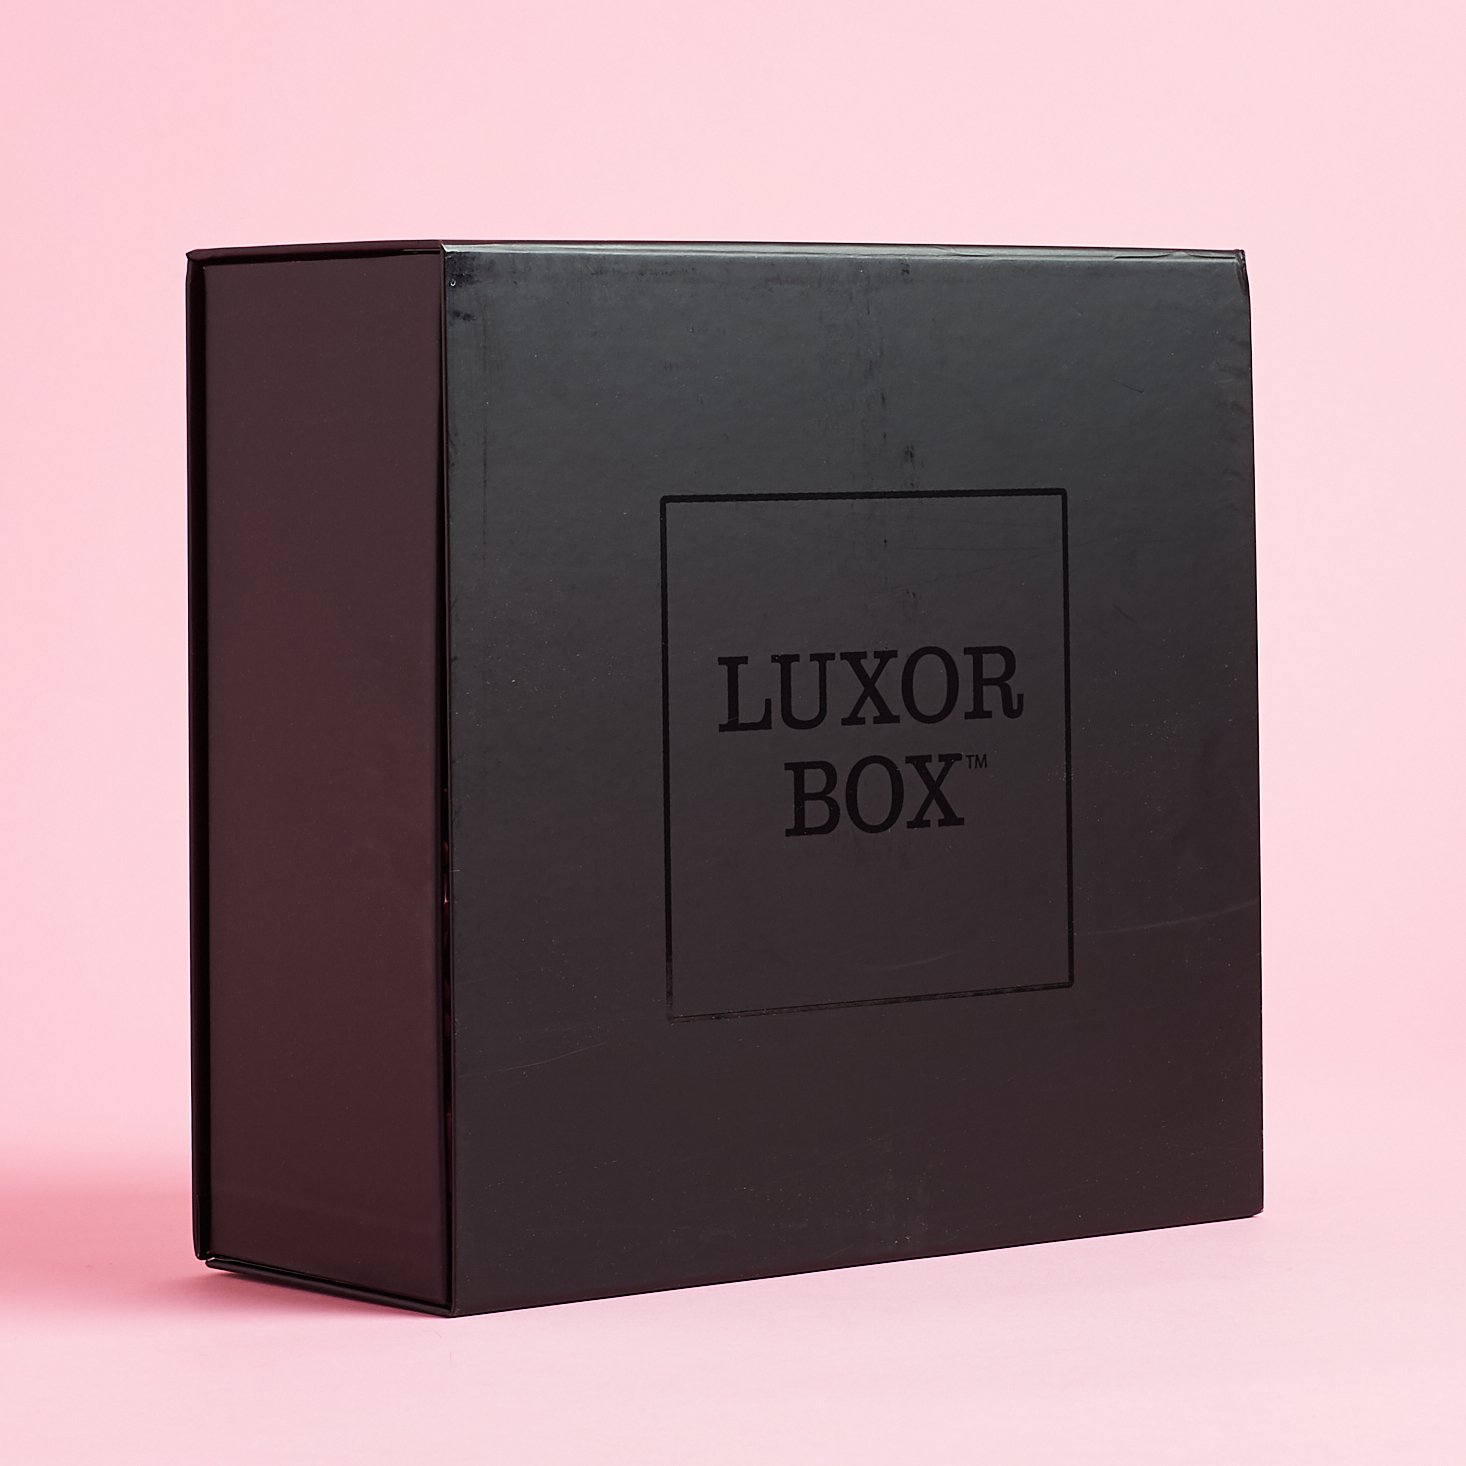 Luxor Box July 2019 Review